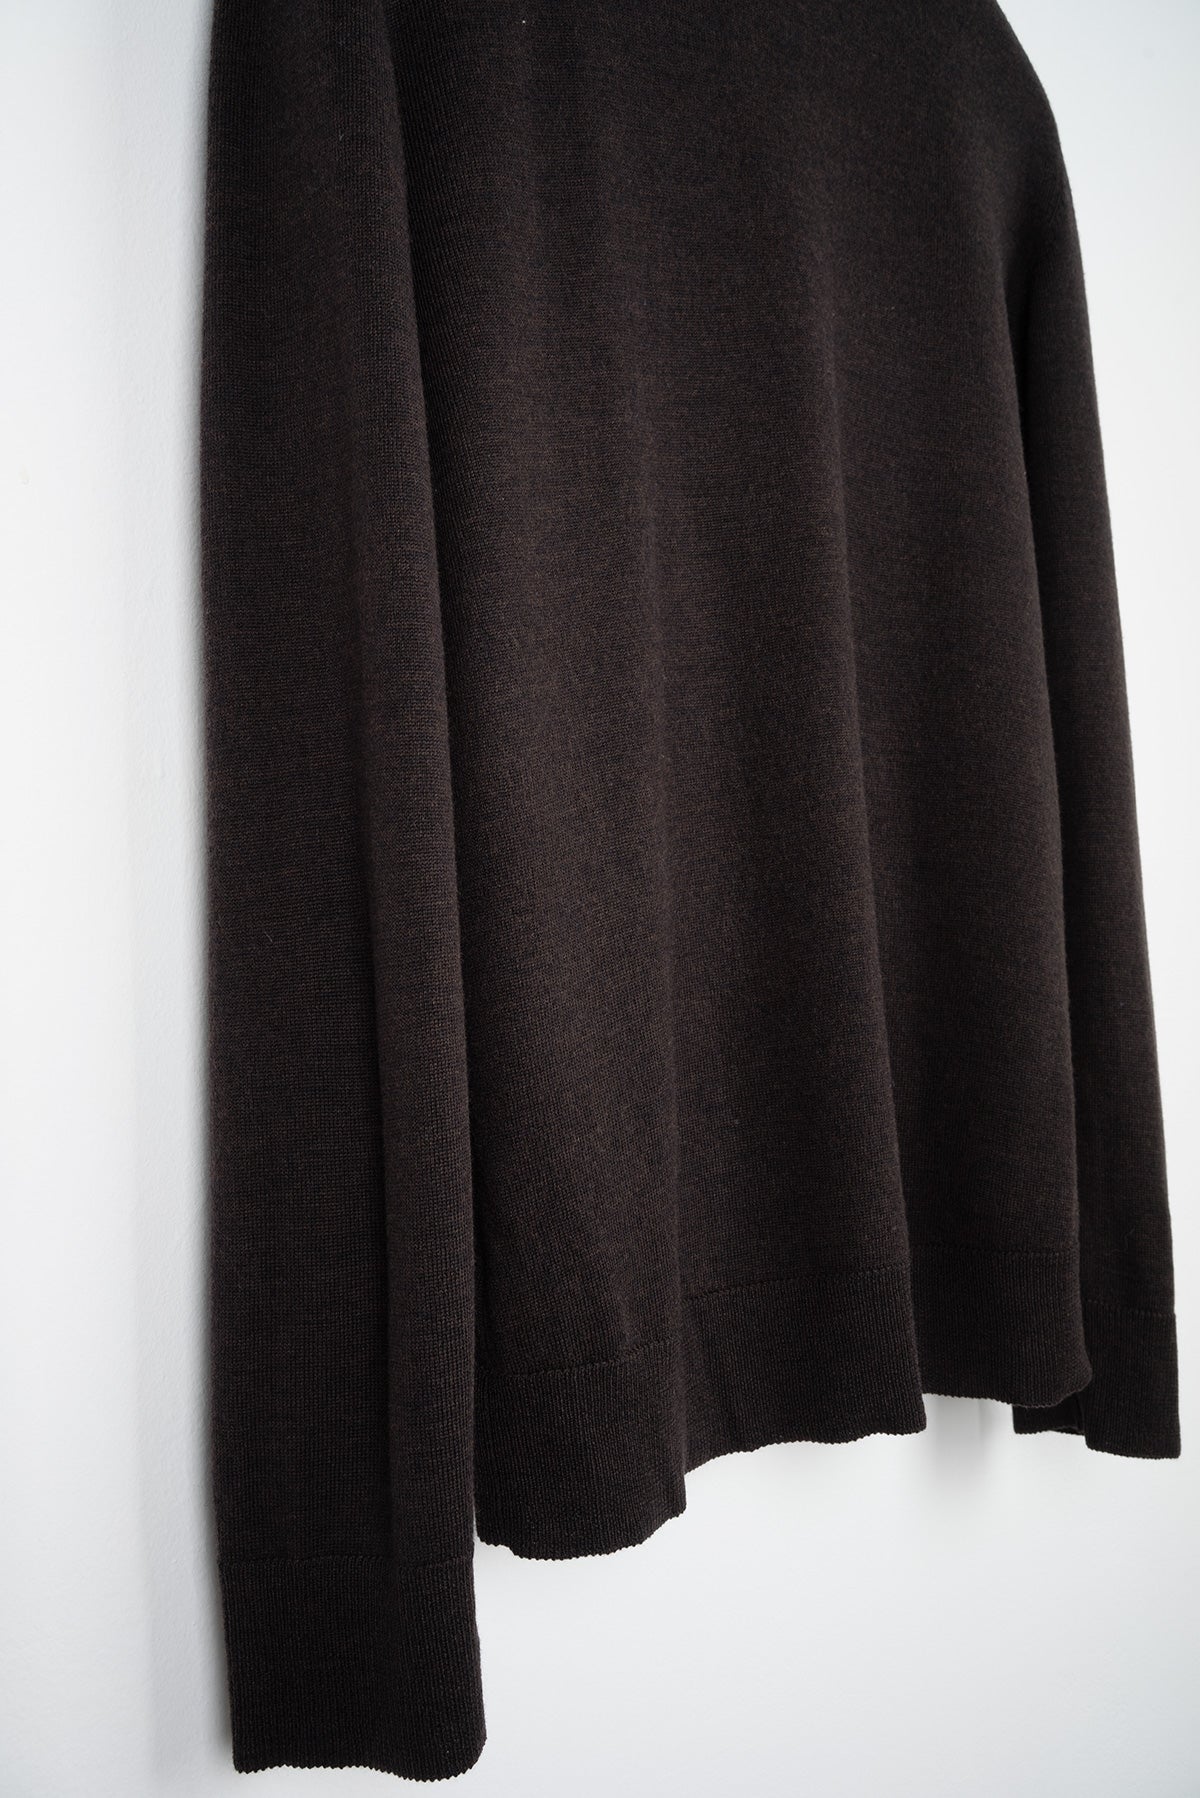 2004 A/W ANATOMIC V-NECK SWEATER WITH SHOULDER SEAM DETAIL